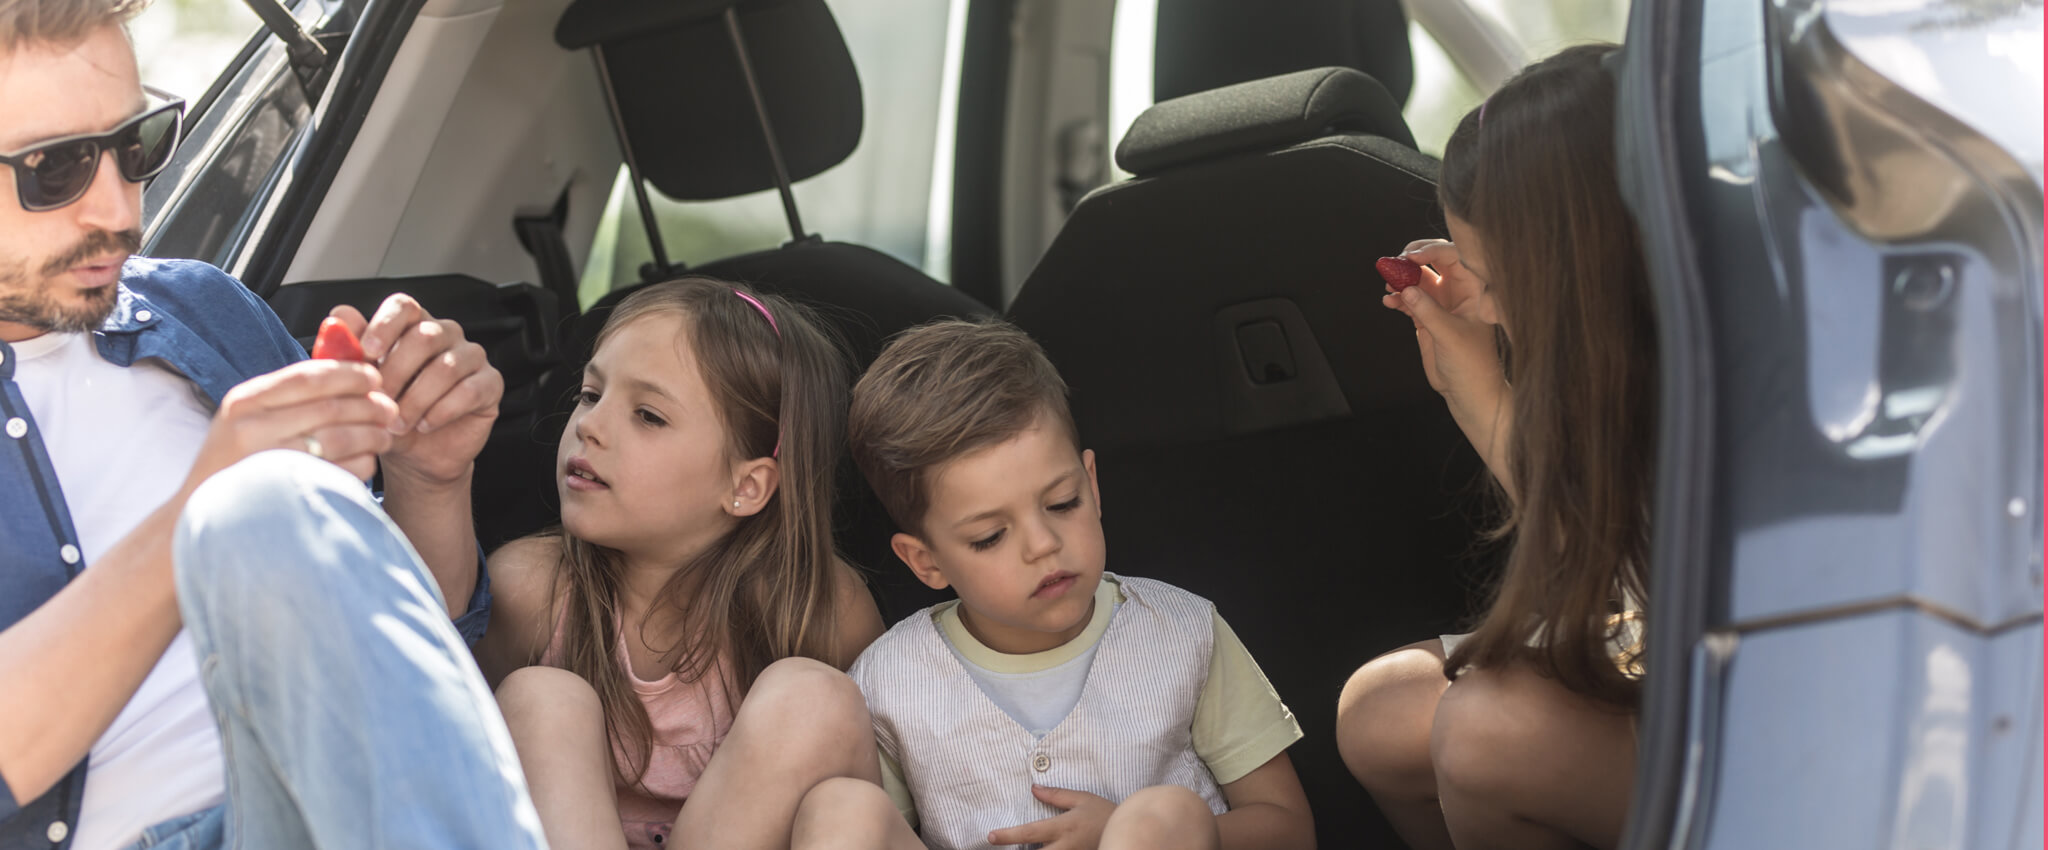 MomClone-Road-Trips-with-Kids.